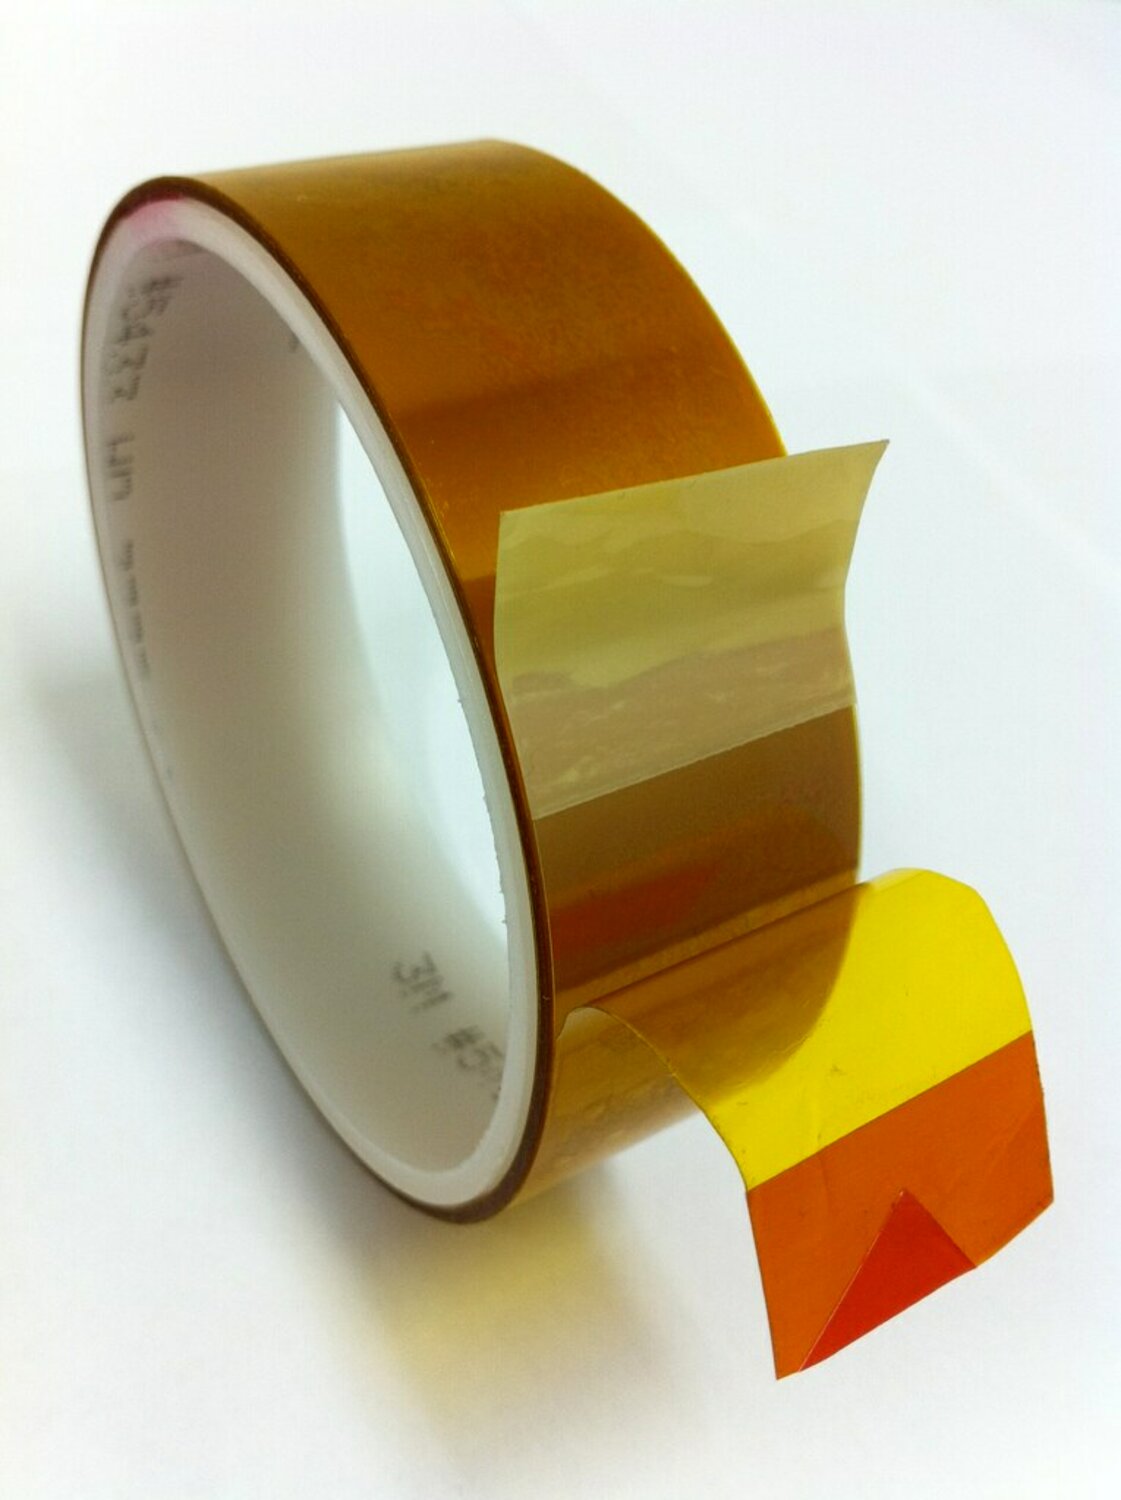 7010372801 - 3M Linered Low-Static Polyimide Film Tape 5433 Amber, 2 in x 36 yds x
2.7 mil, 6/Case, Bulk